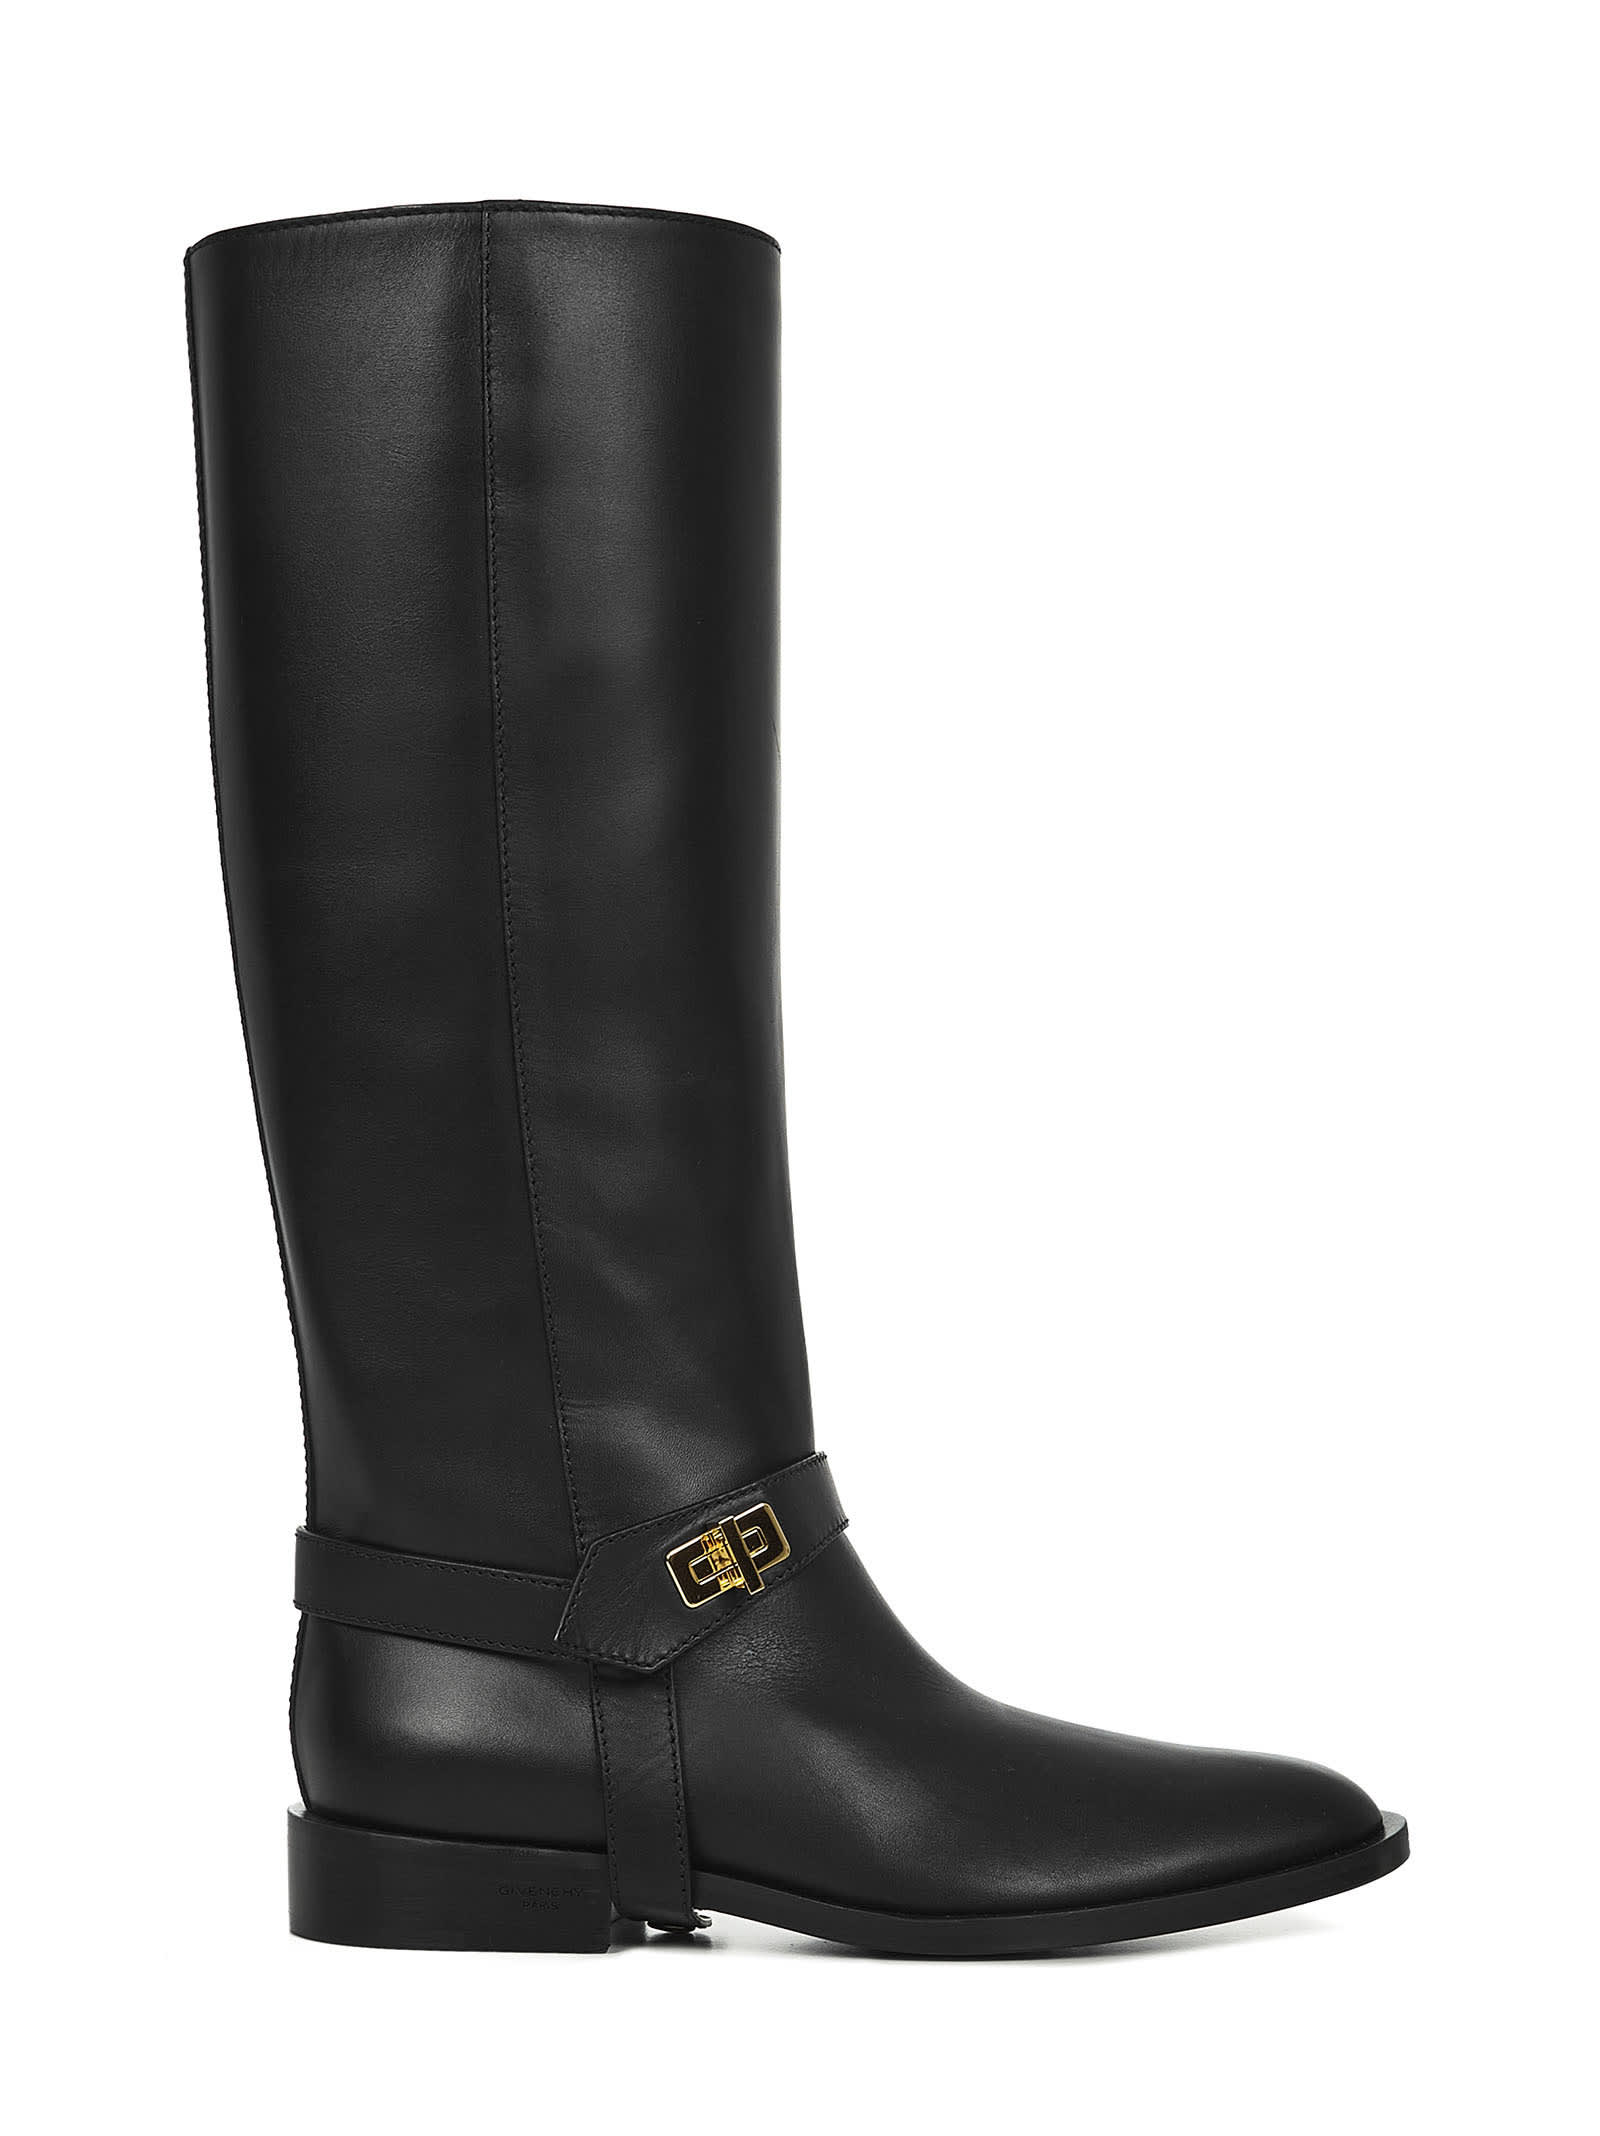 Buy Givenchy Boots Eden online, shop Givenchy shoes with free shipping